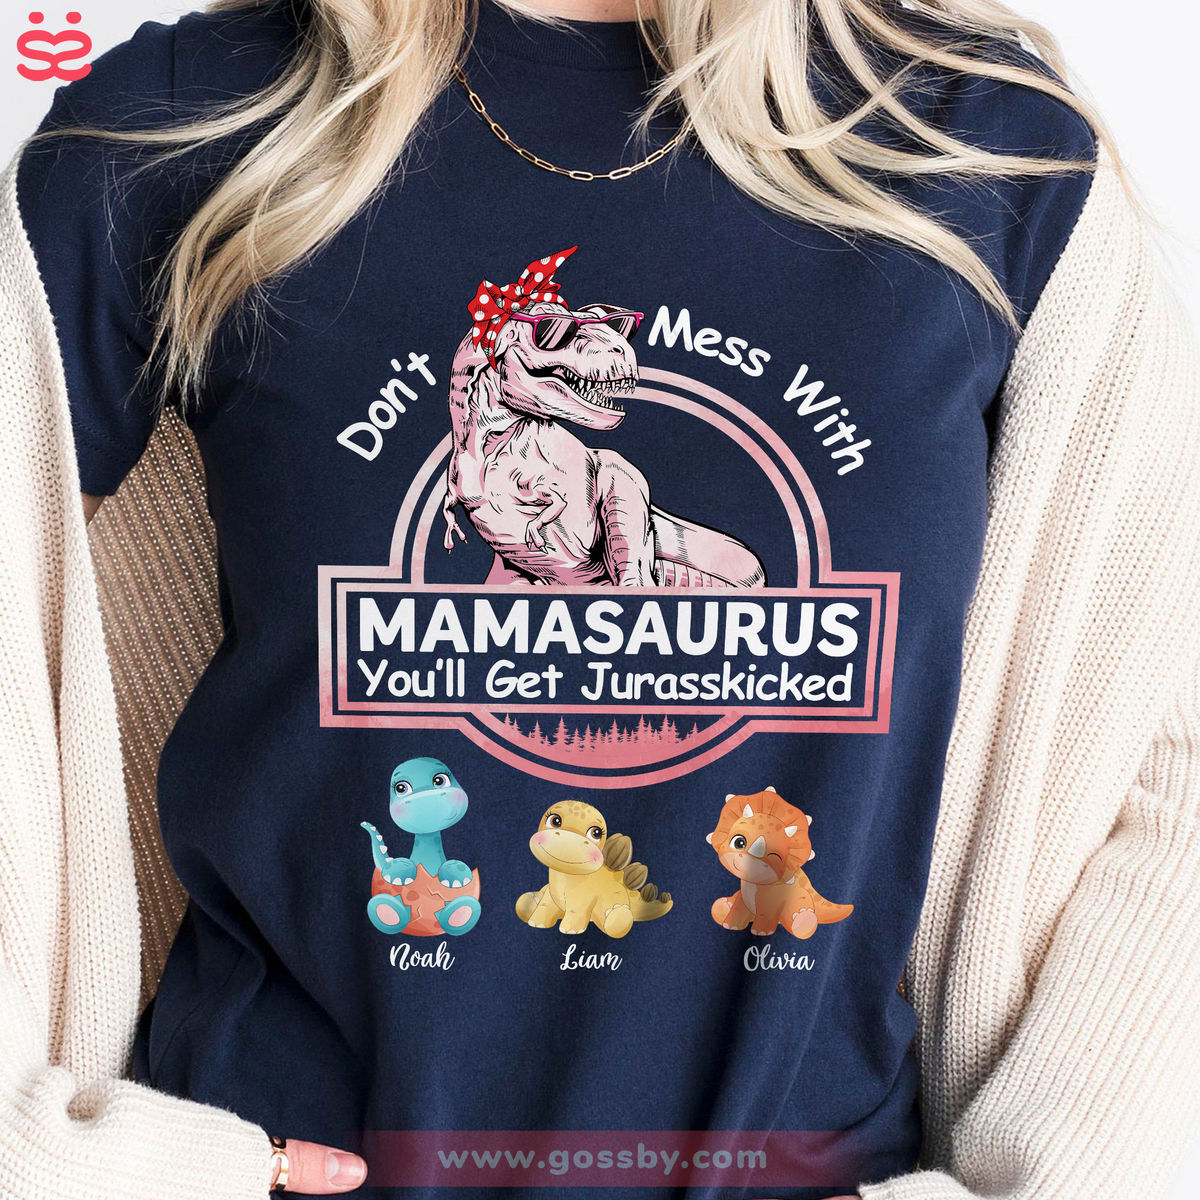 Don't Mess With Mamasaurus - Ver 2 - Birthday Gift, Mother's Day Gift For Mom